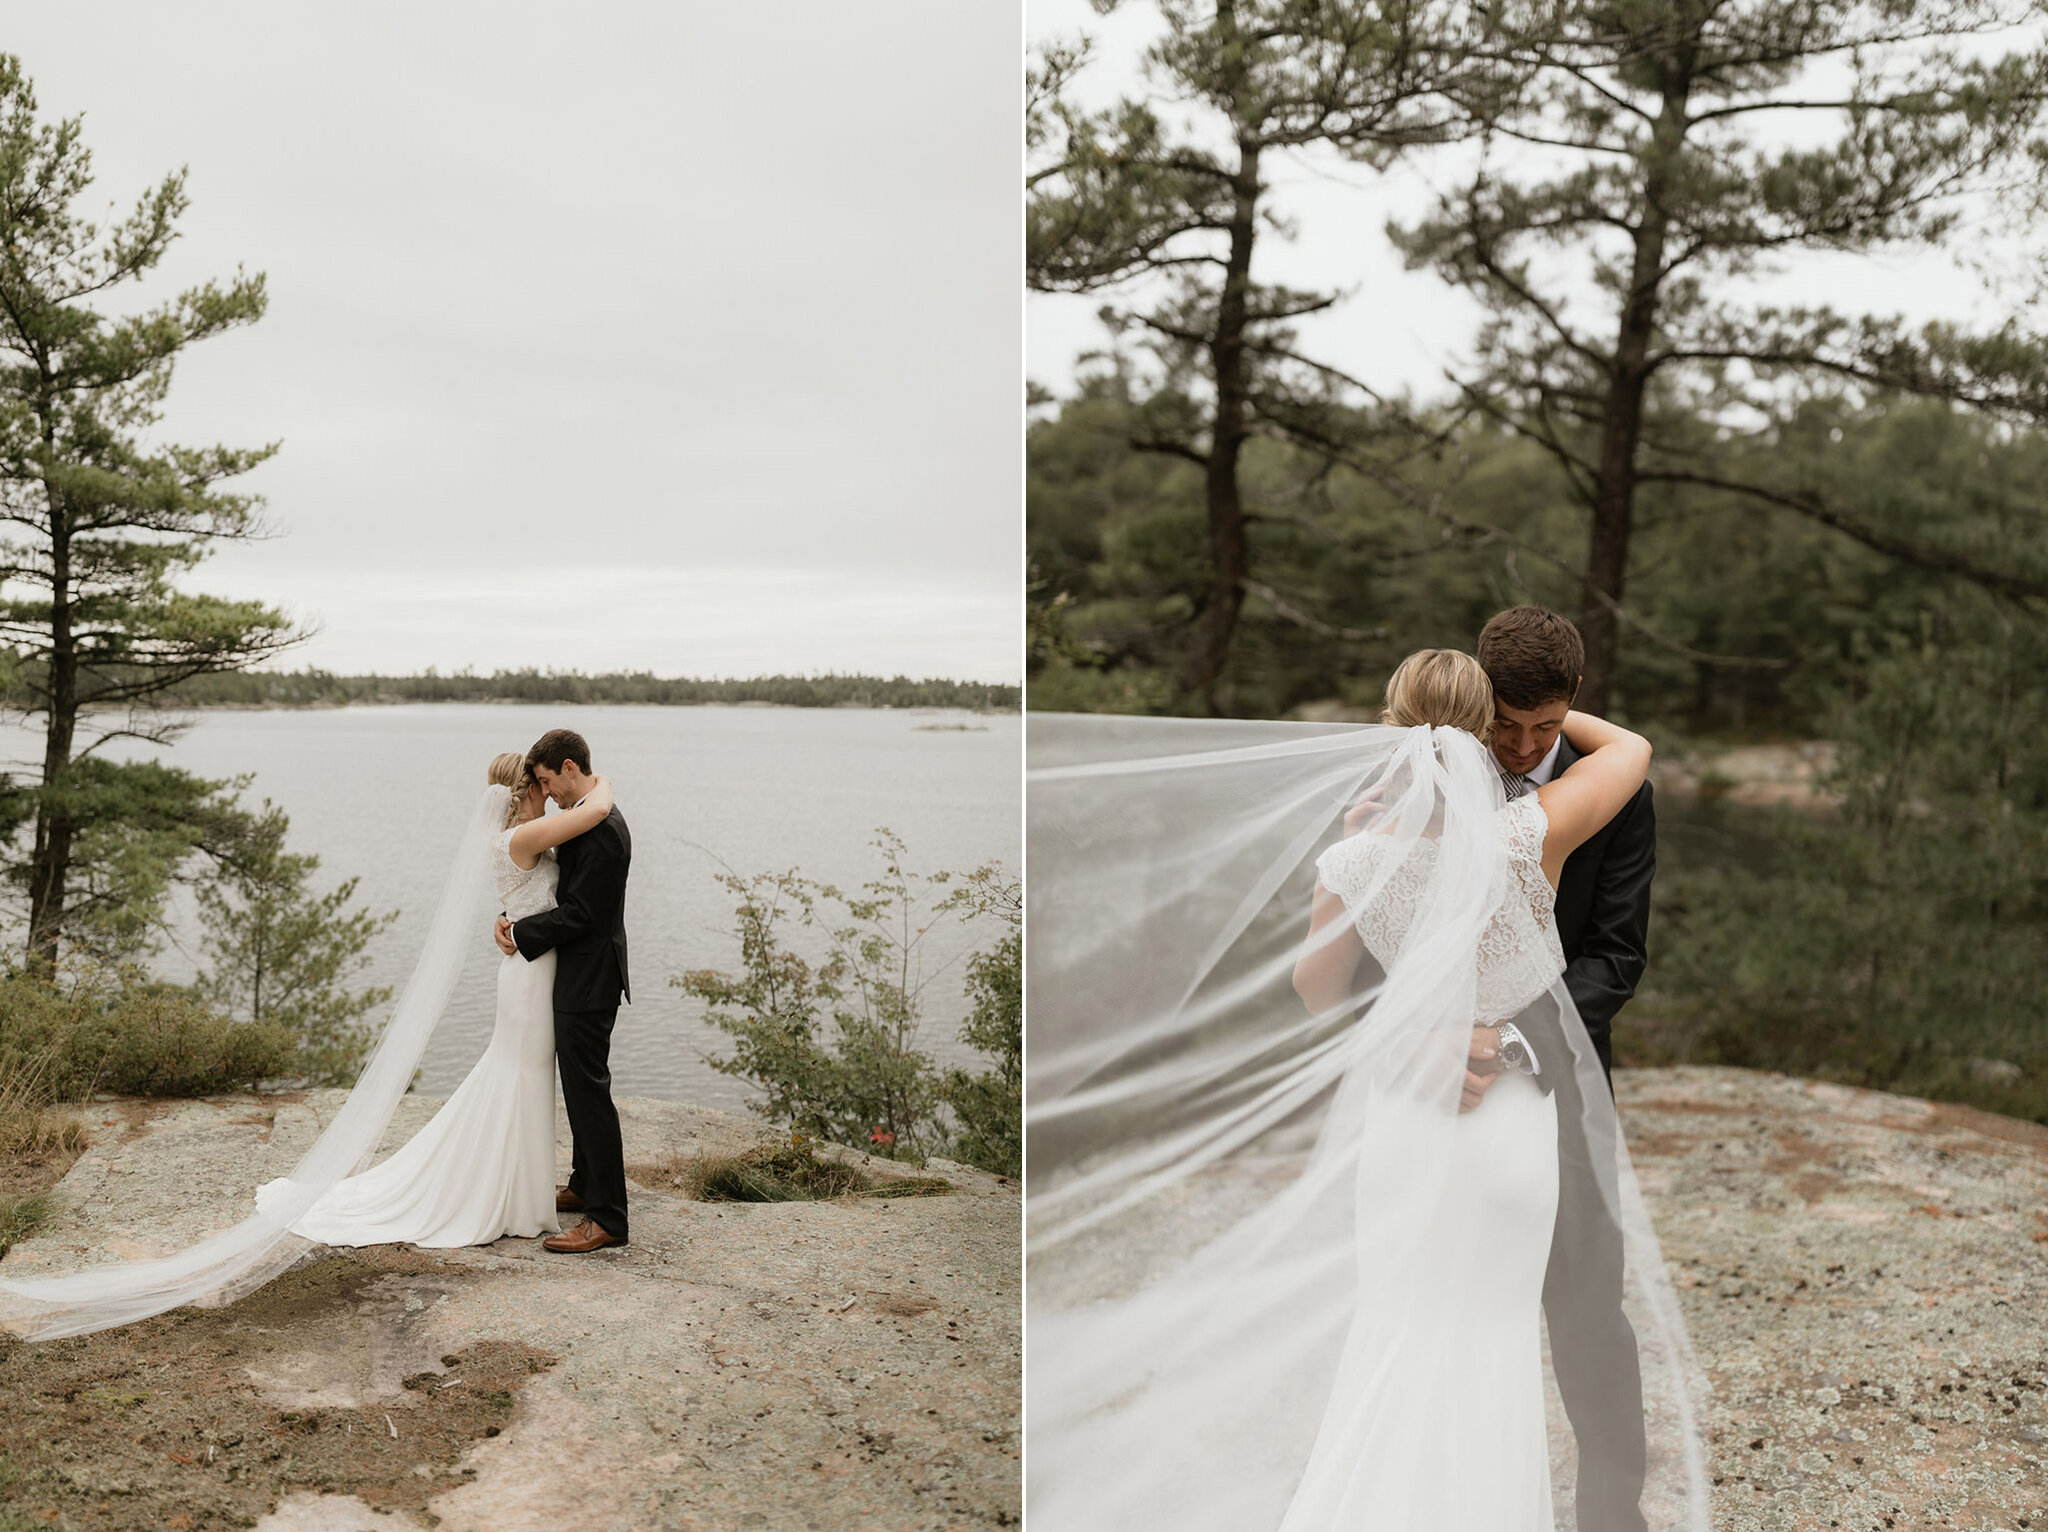 Couple with cathedral veil overlooking Georgian Bay